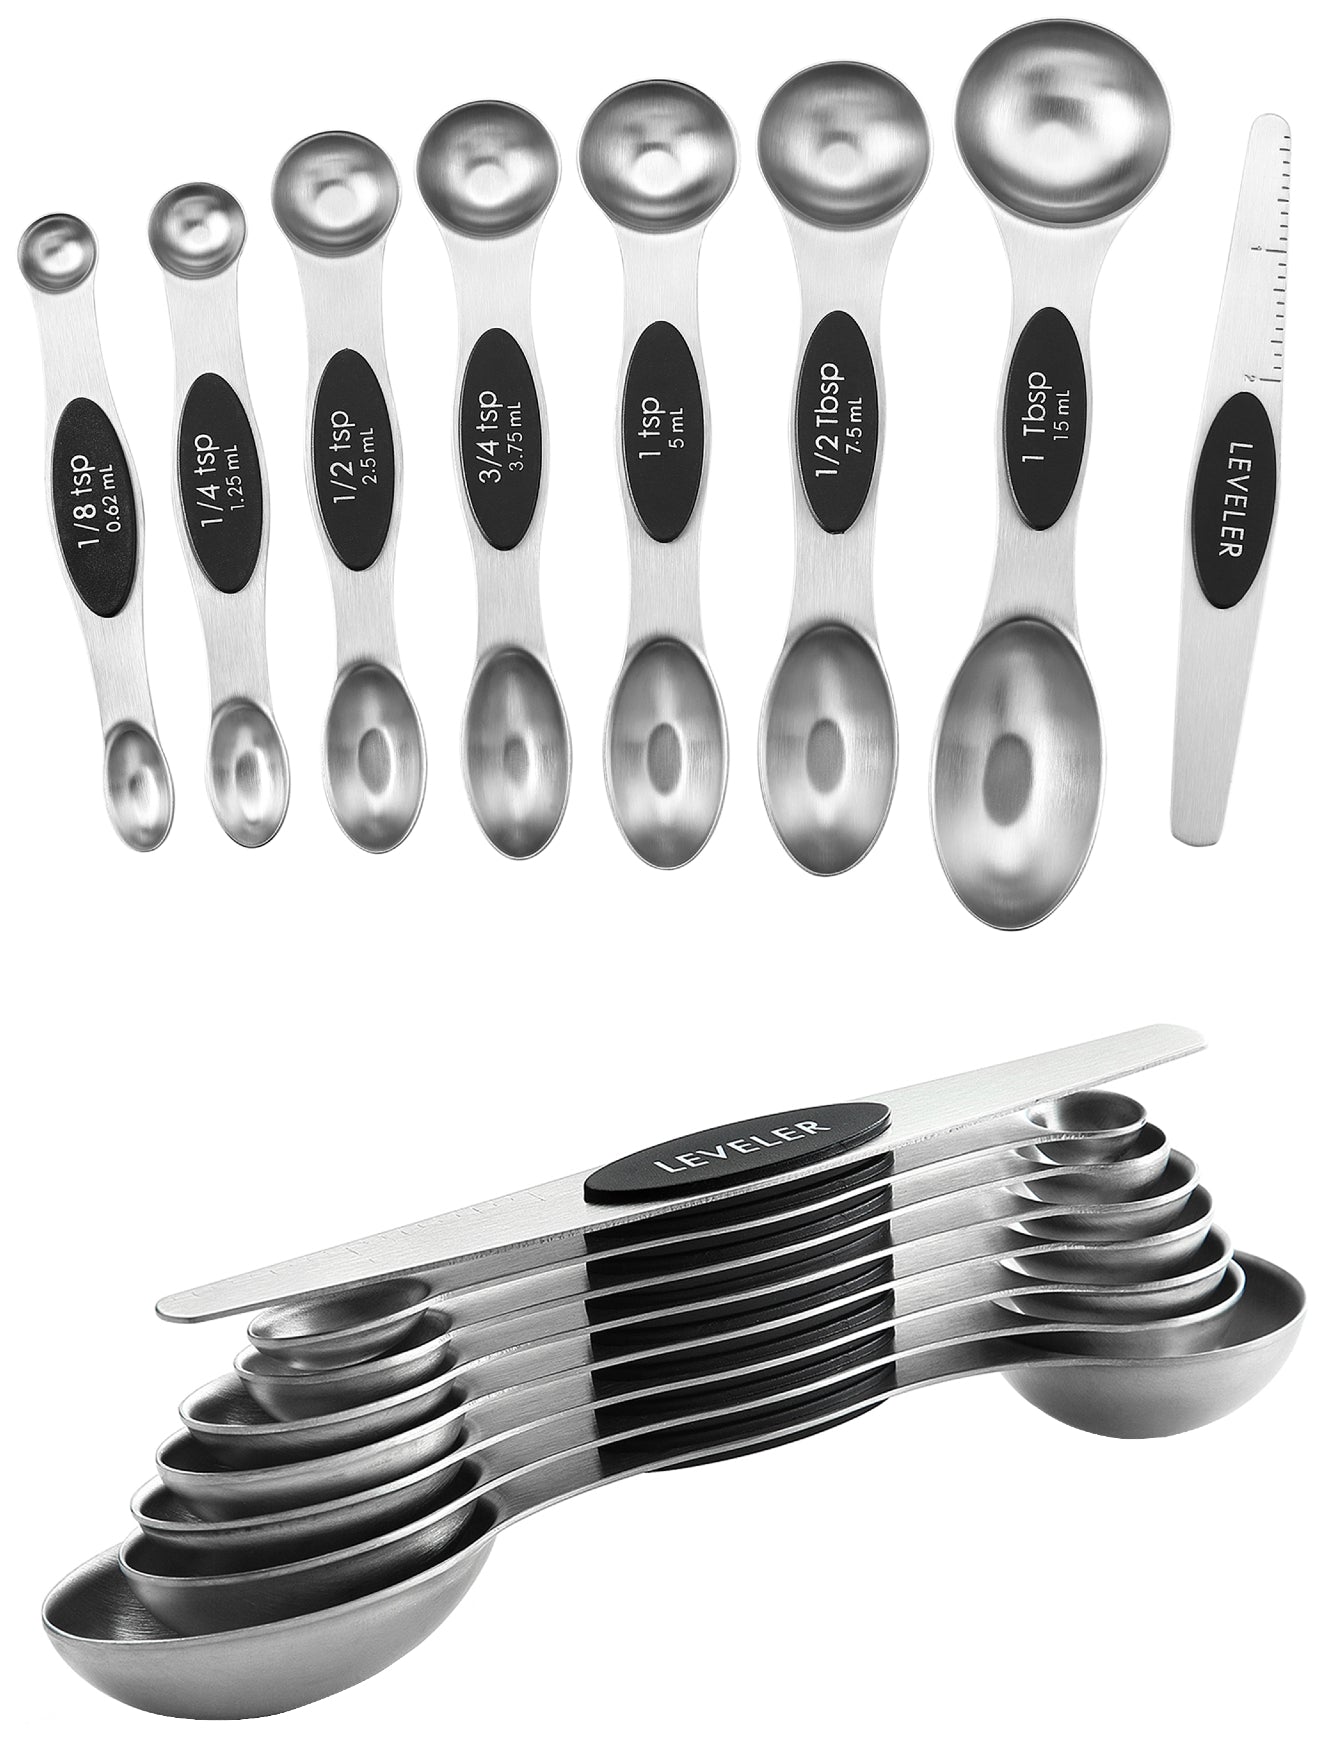 Spring Chef Oval Stainless Steel Measuring Spoons, Set of 7 & 5 Quart  Mixing Bowl With Pour Spout, White - 2 Product Bundle